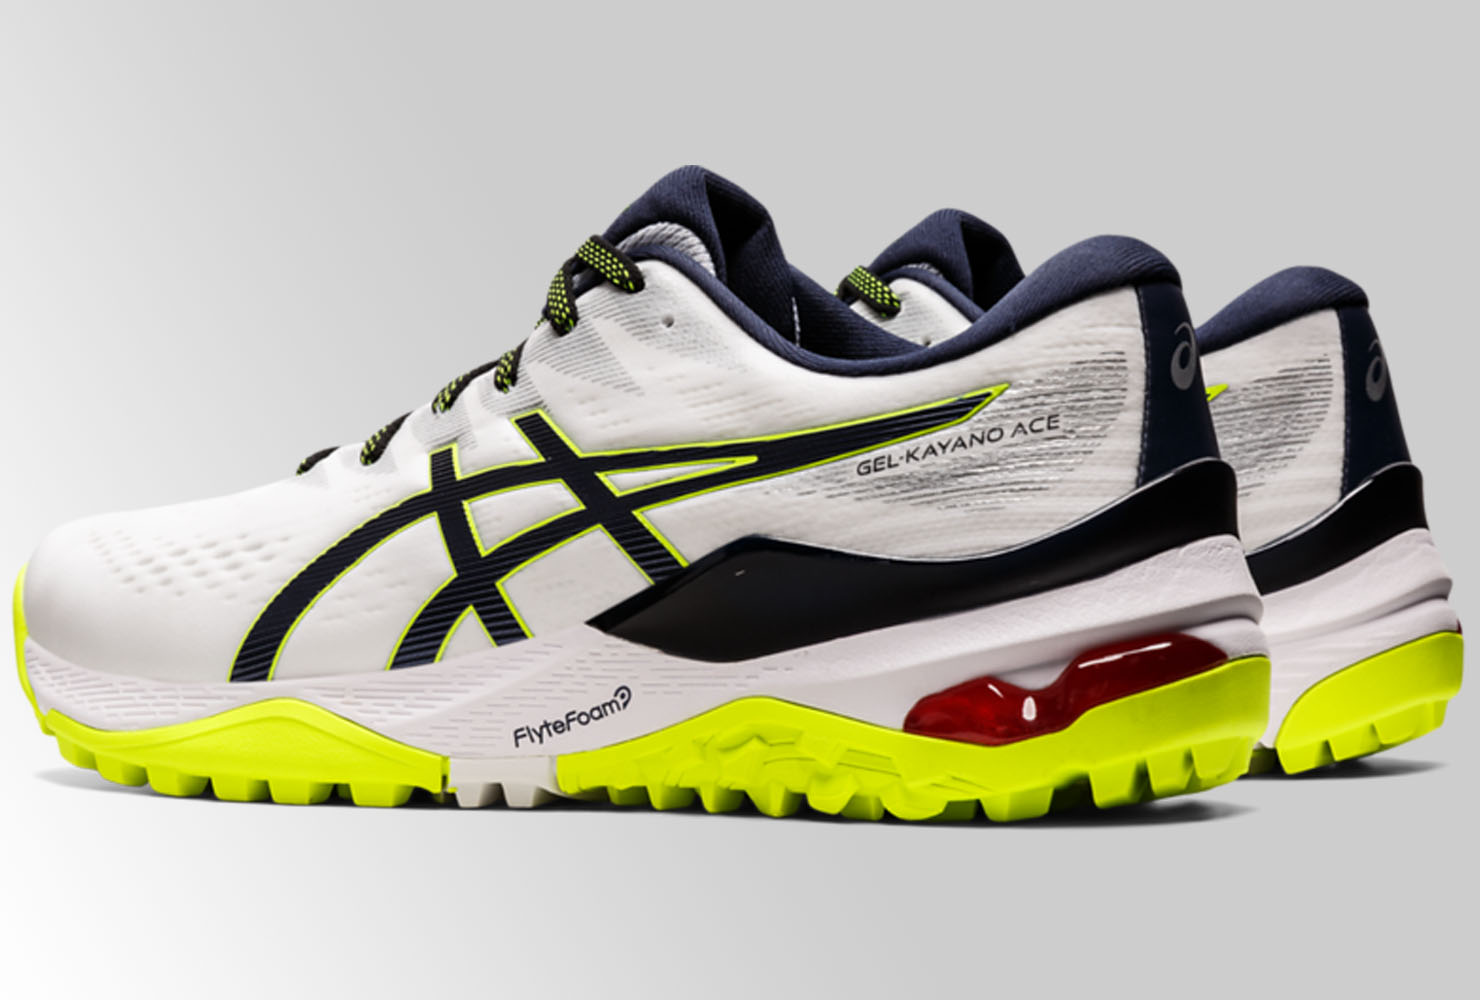 ASICS Gel-Kayano Ace Golf Shoes - The Hackers Paradise